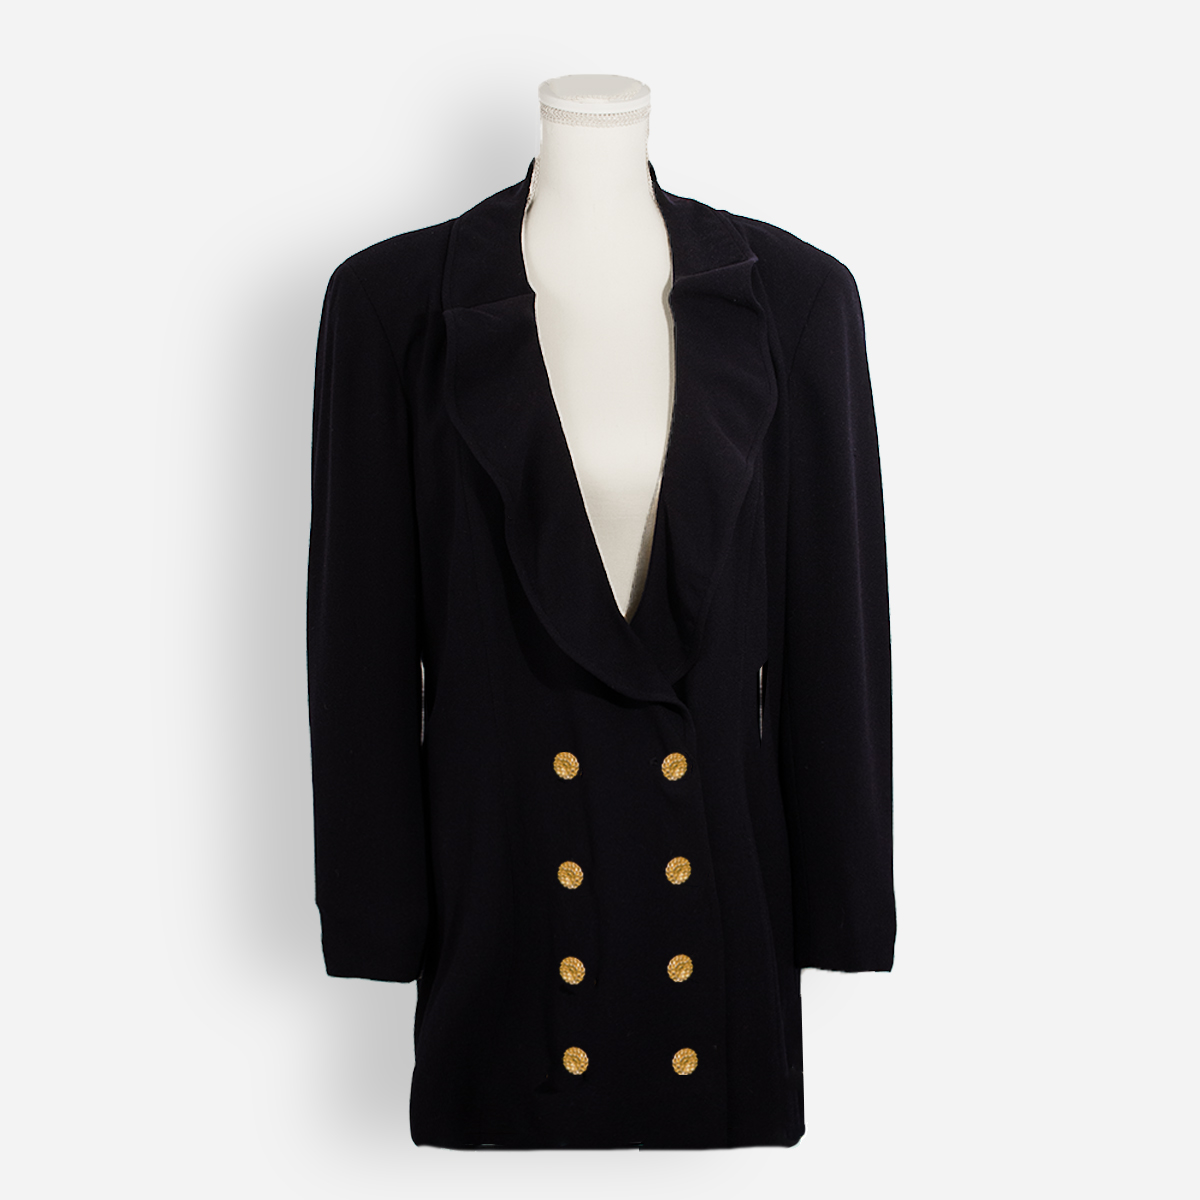 Valentino Boutique Navy Double-Breasted Blazer, Size 16